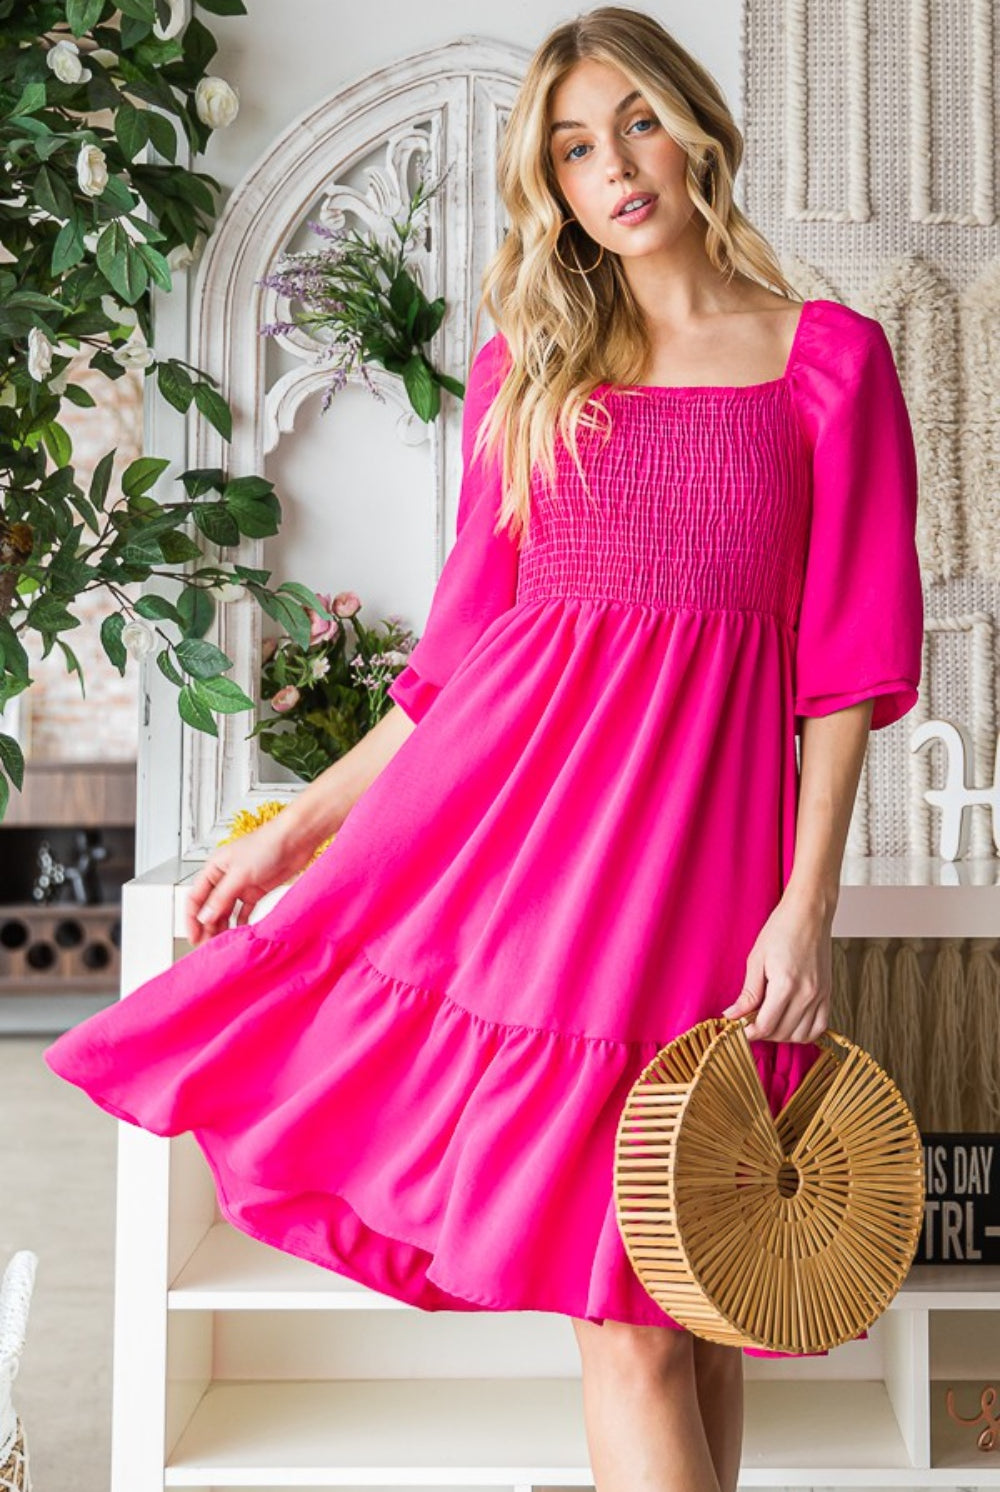 A stylish woman poses in a vibrant pink smocked ruffle hem dress, holding a trendy bamboo circle bag, creating an effervescent and fashion-forward summer outfit.